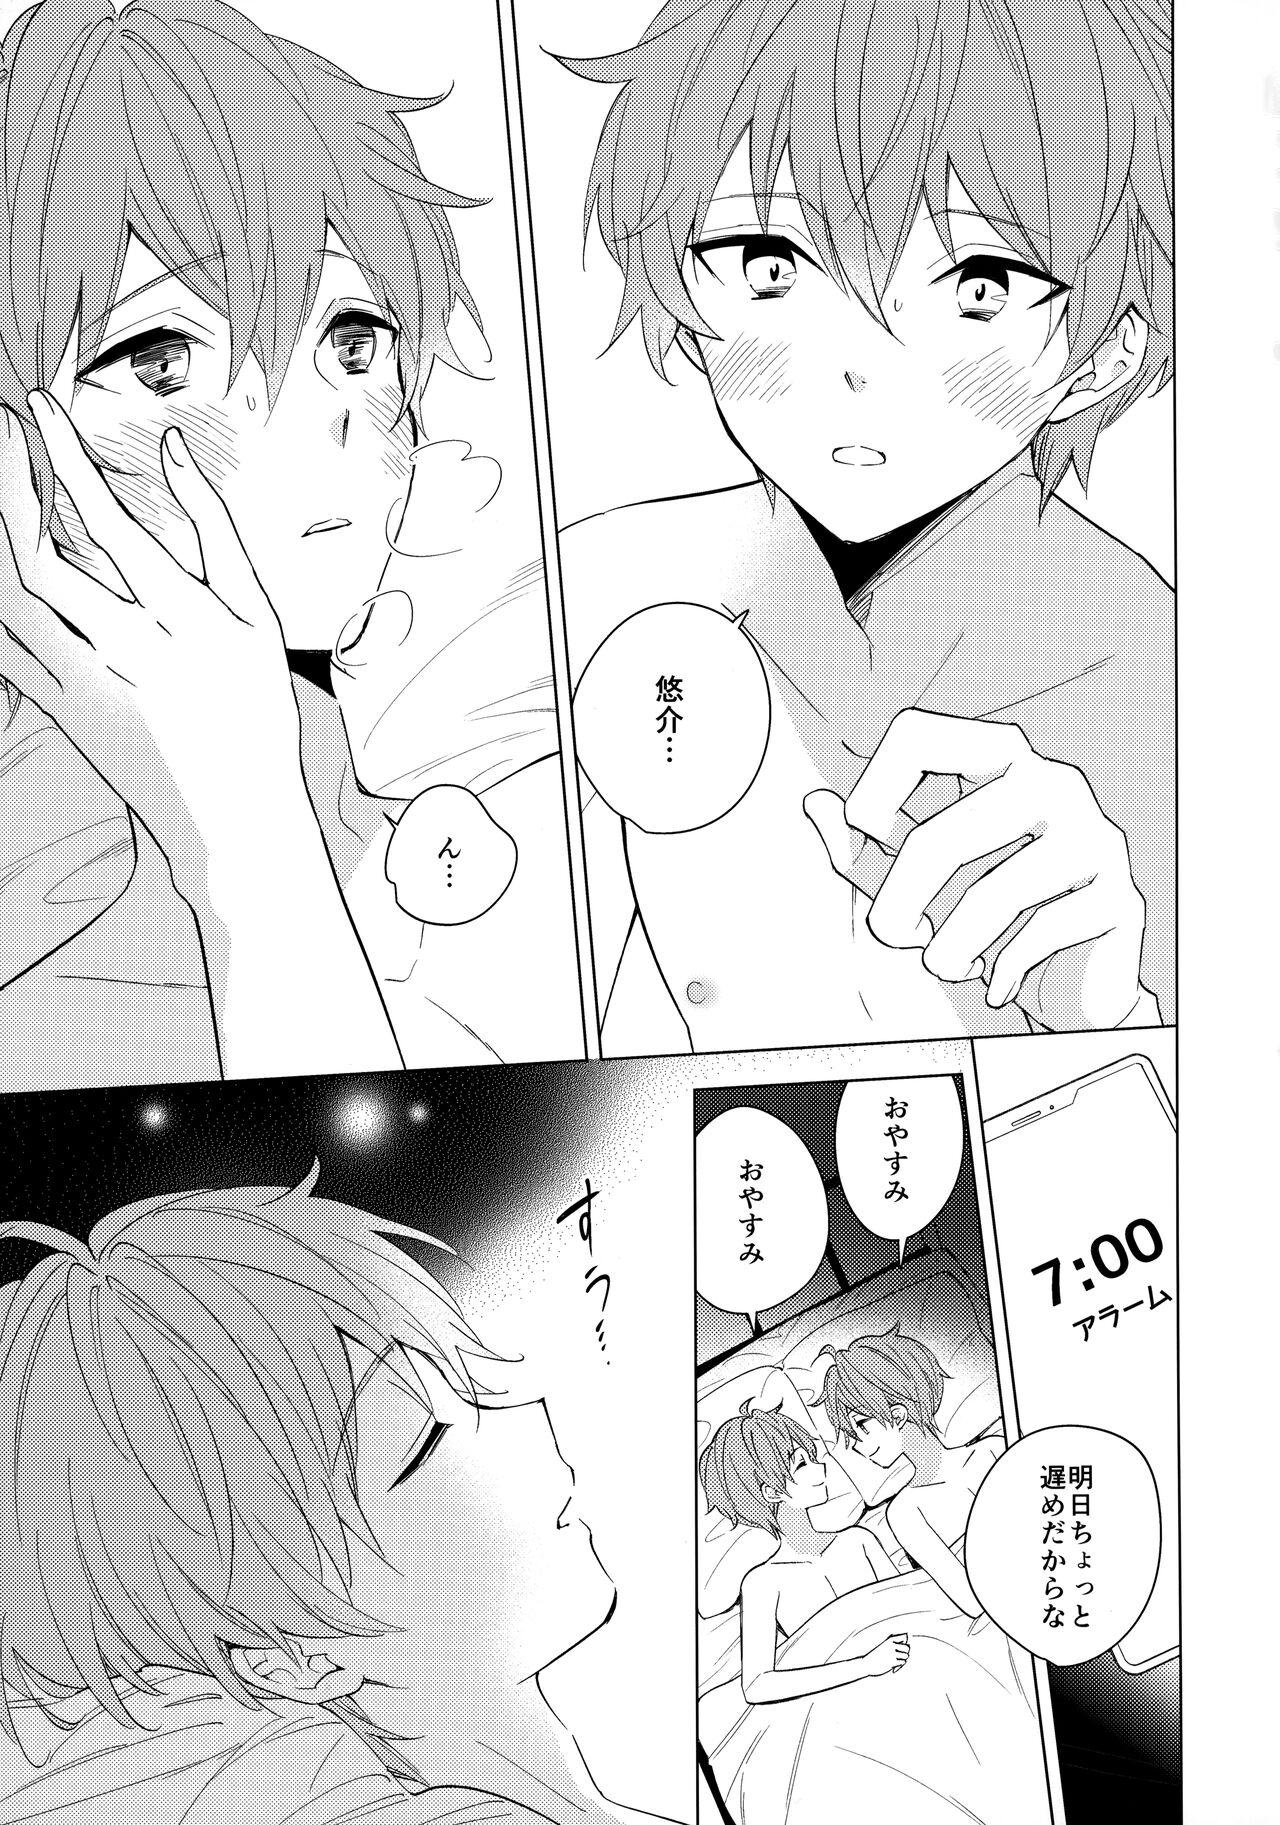 Gay 3some june, lemon, and you - The idolmaster sidem Chaturbate - Page 4